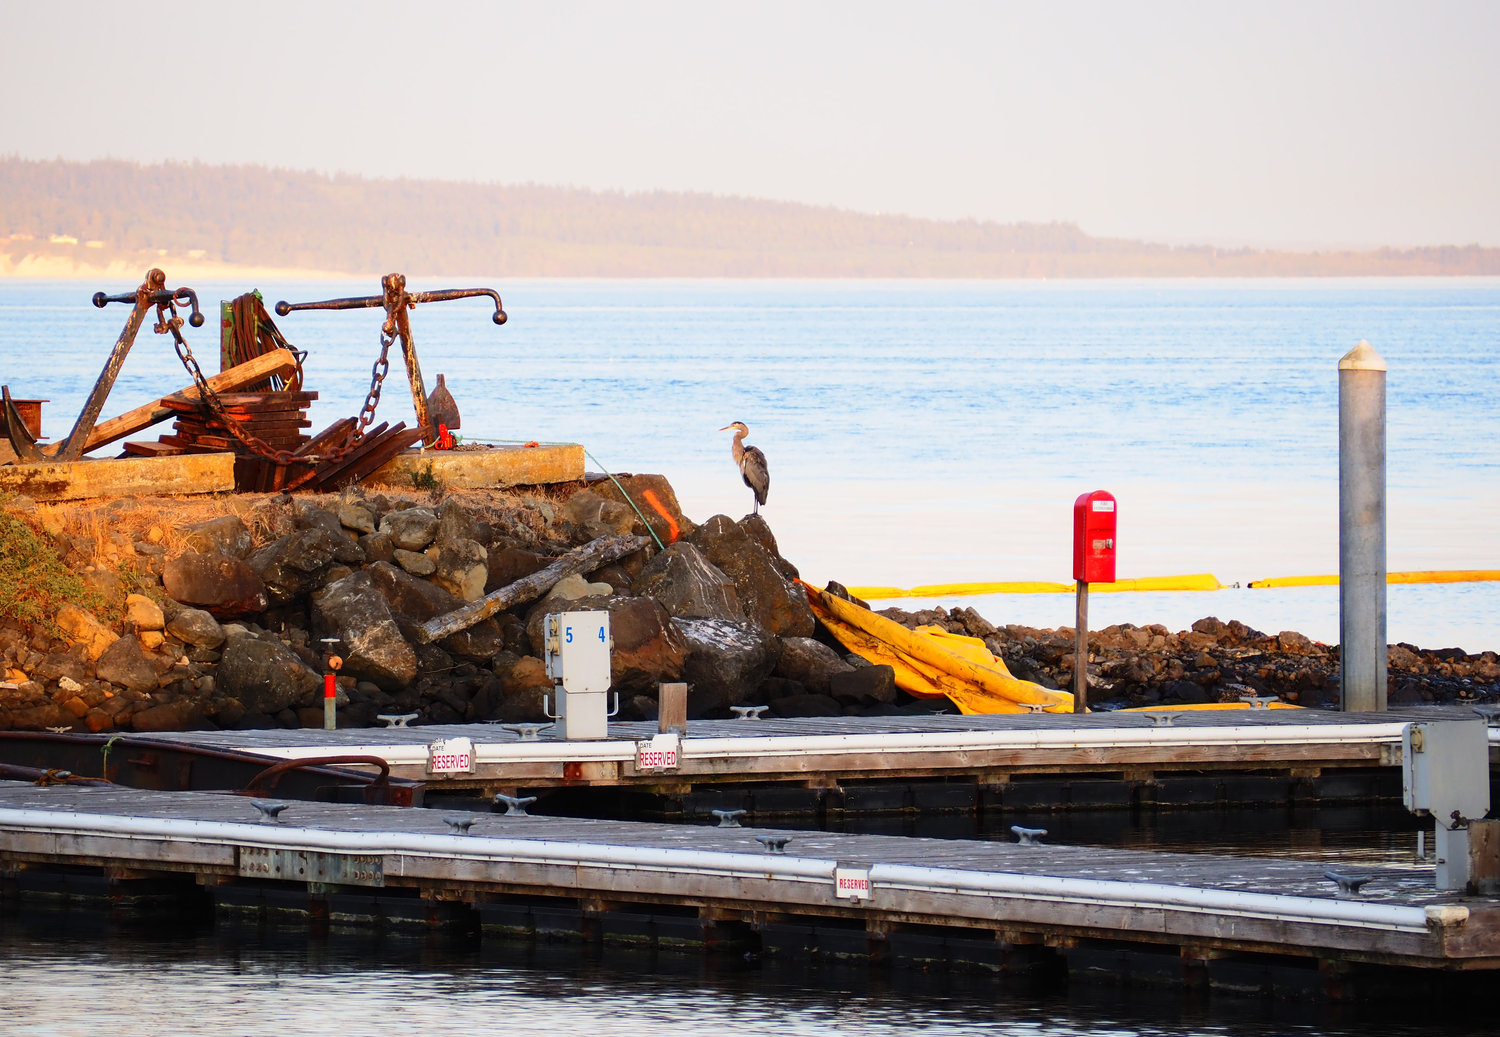 A heron comes to inspect the work at Point Hudson after the first week of demolition on the old jetty.